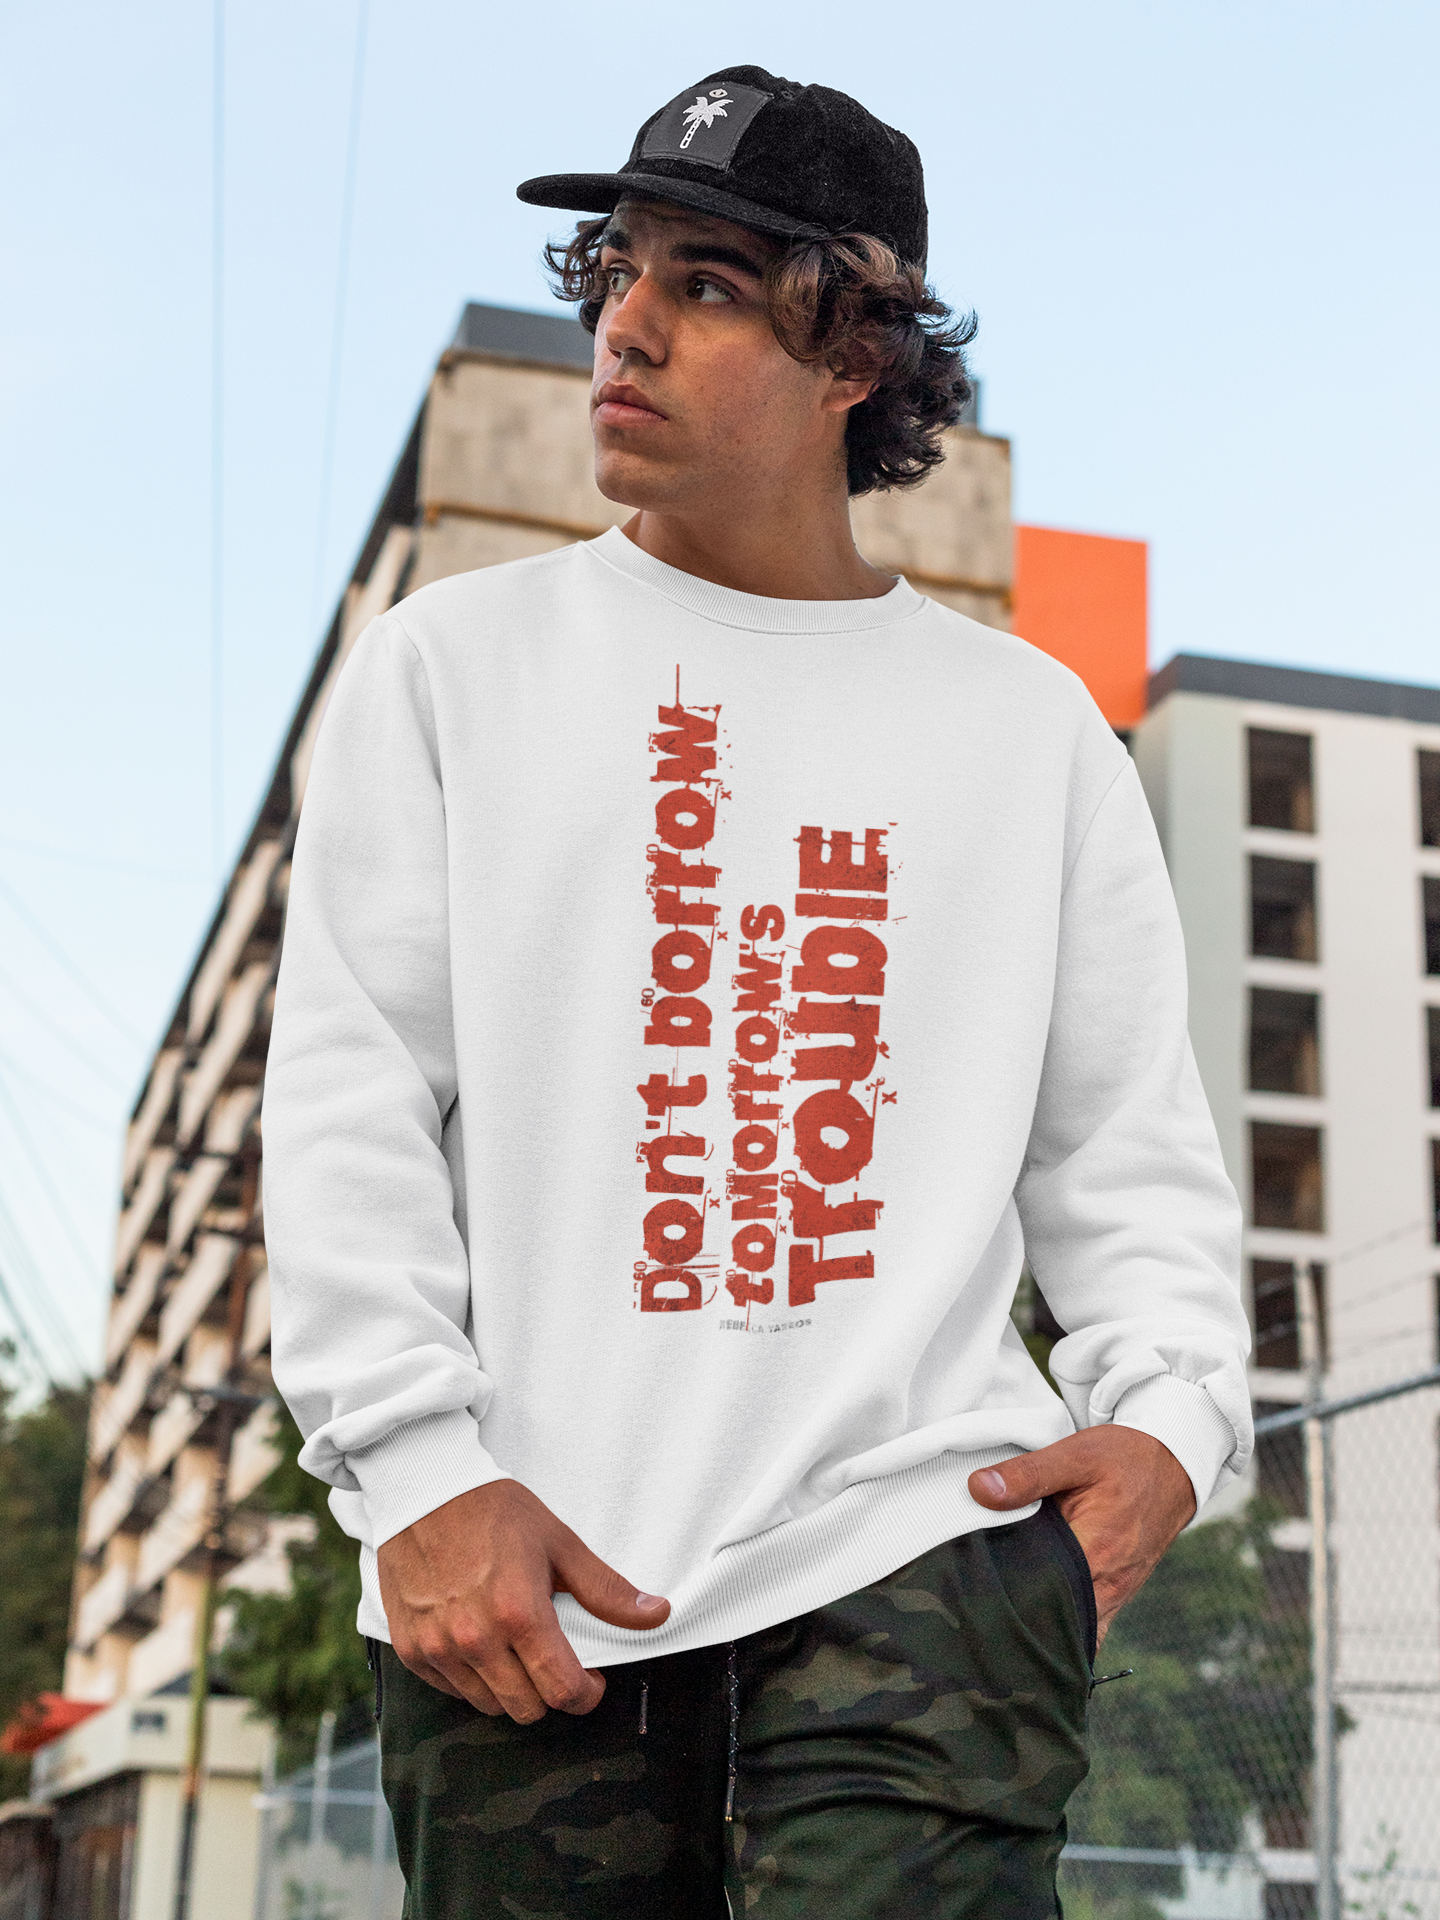 Don't borrow tomorrows troubles Sweatshirt- Officially Licensed Fourth Wing by Rebecca Yarros Merchandise